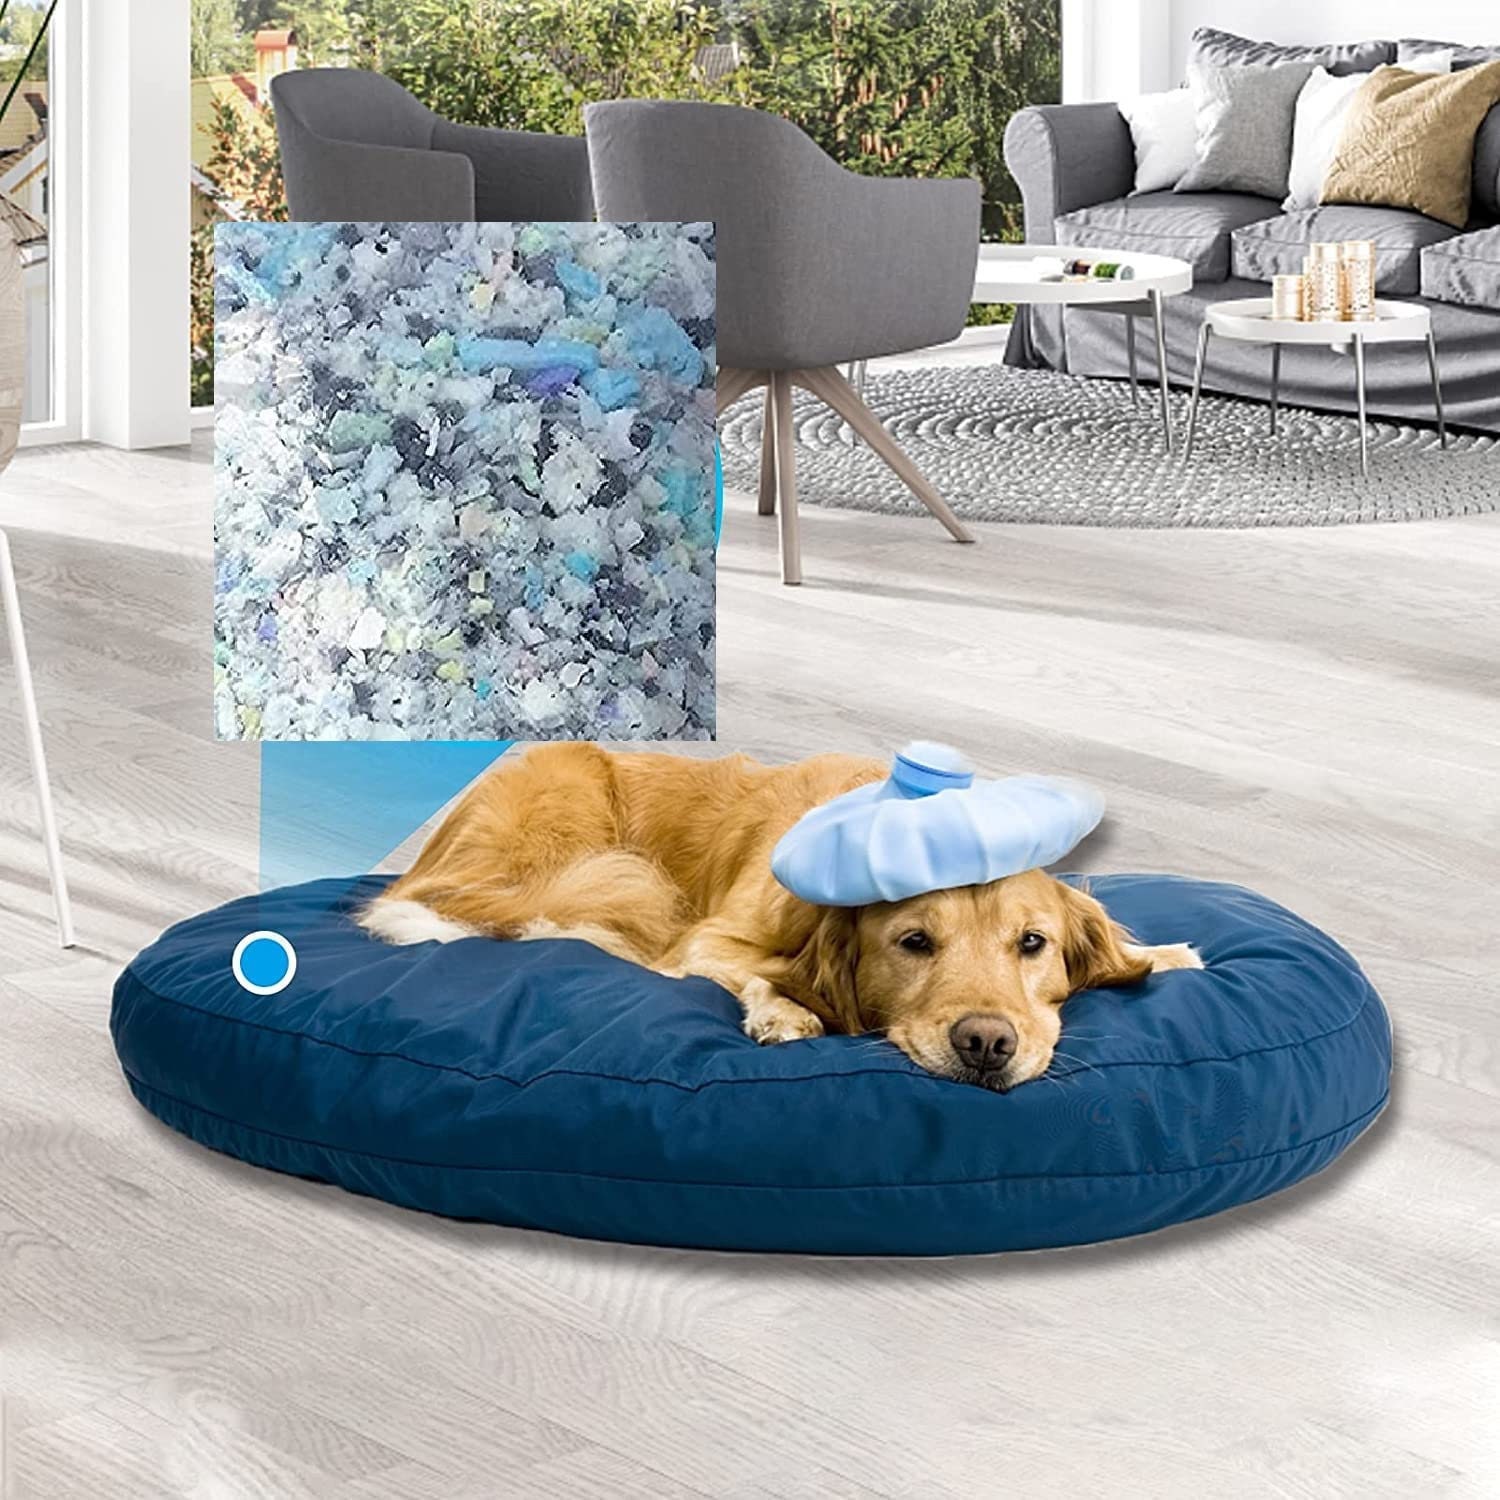 Eurotex Bean Bag Filler Foam - 2.5 Pound Premium Shredded Memory Foam - Easy Pillow Stuffing Foam for Dog Bed or Couch Cushion - Very Soft and Great